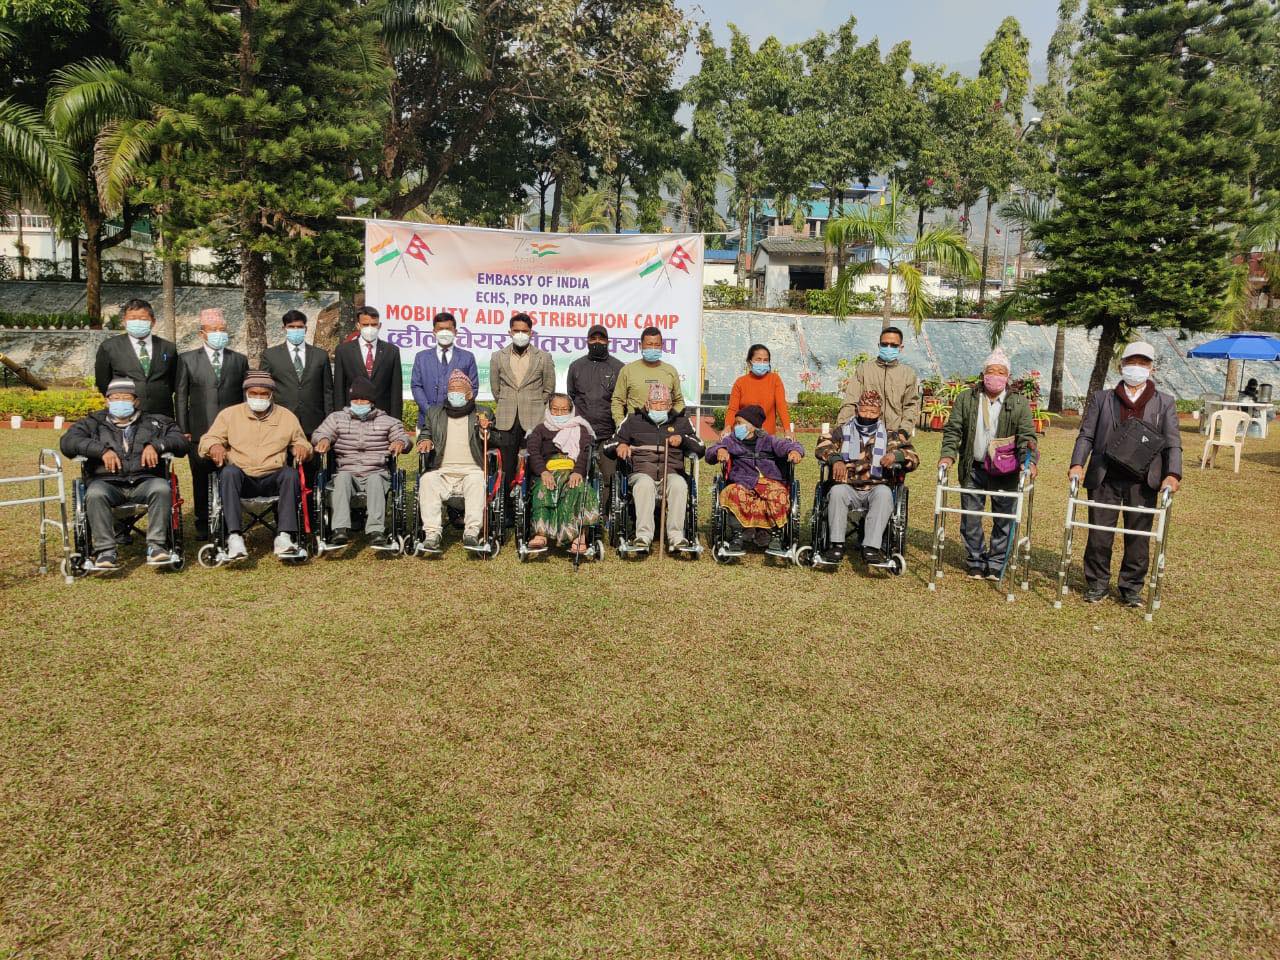 Indian Embassy’s Defence Wing organizes mobility and distribution camp